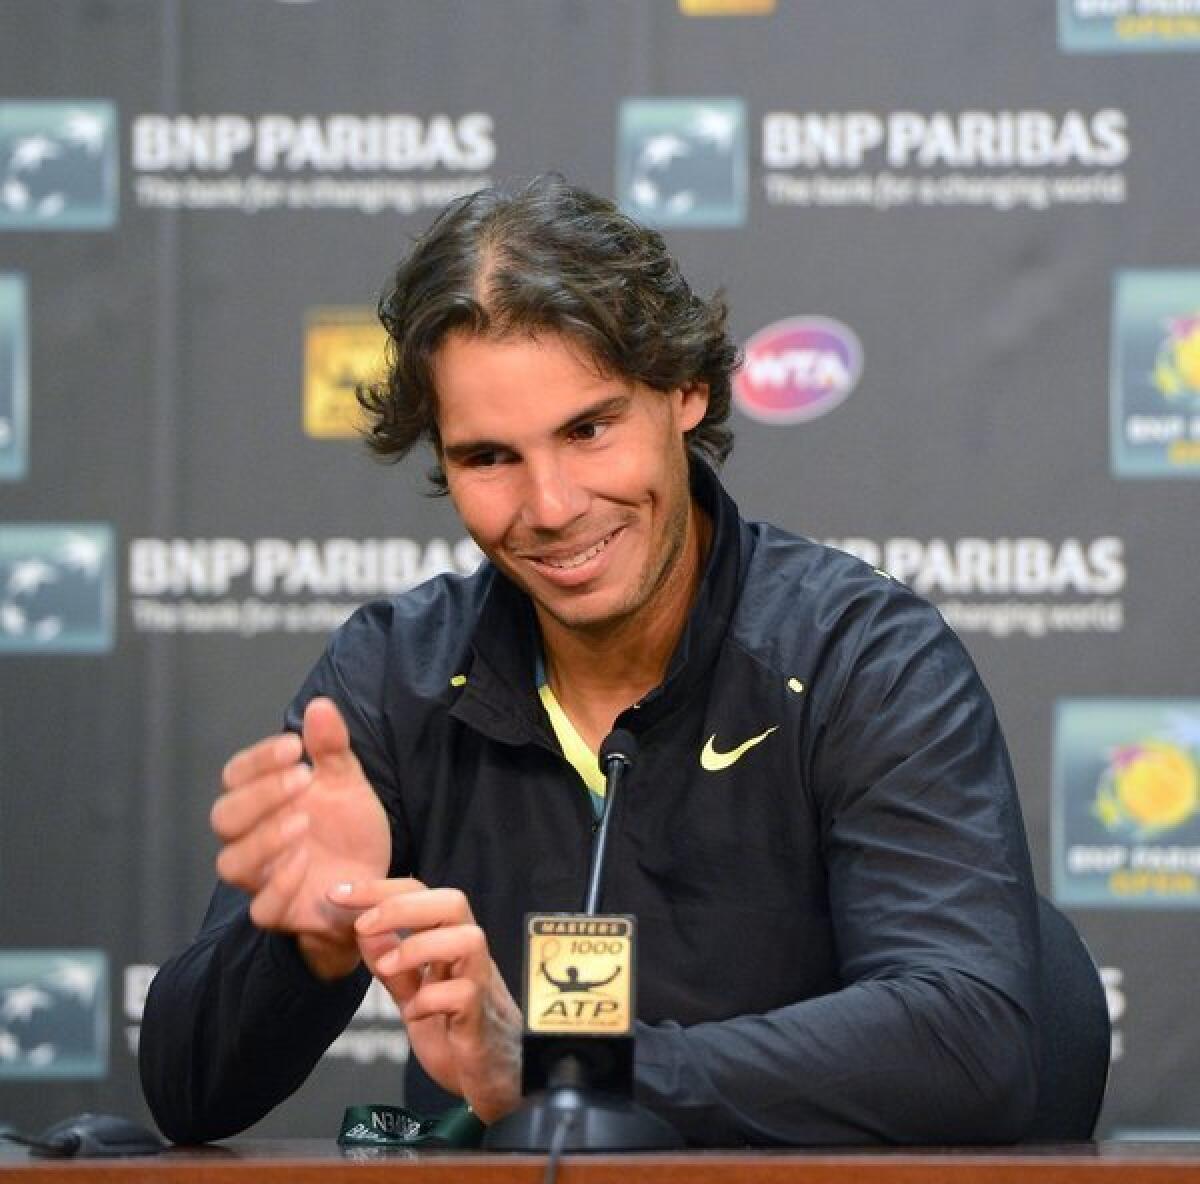 Rafael Nadal talks about his easy victory on Monday.